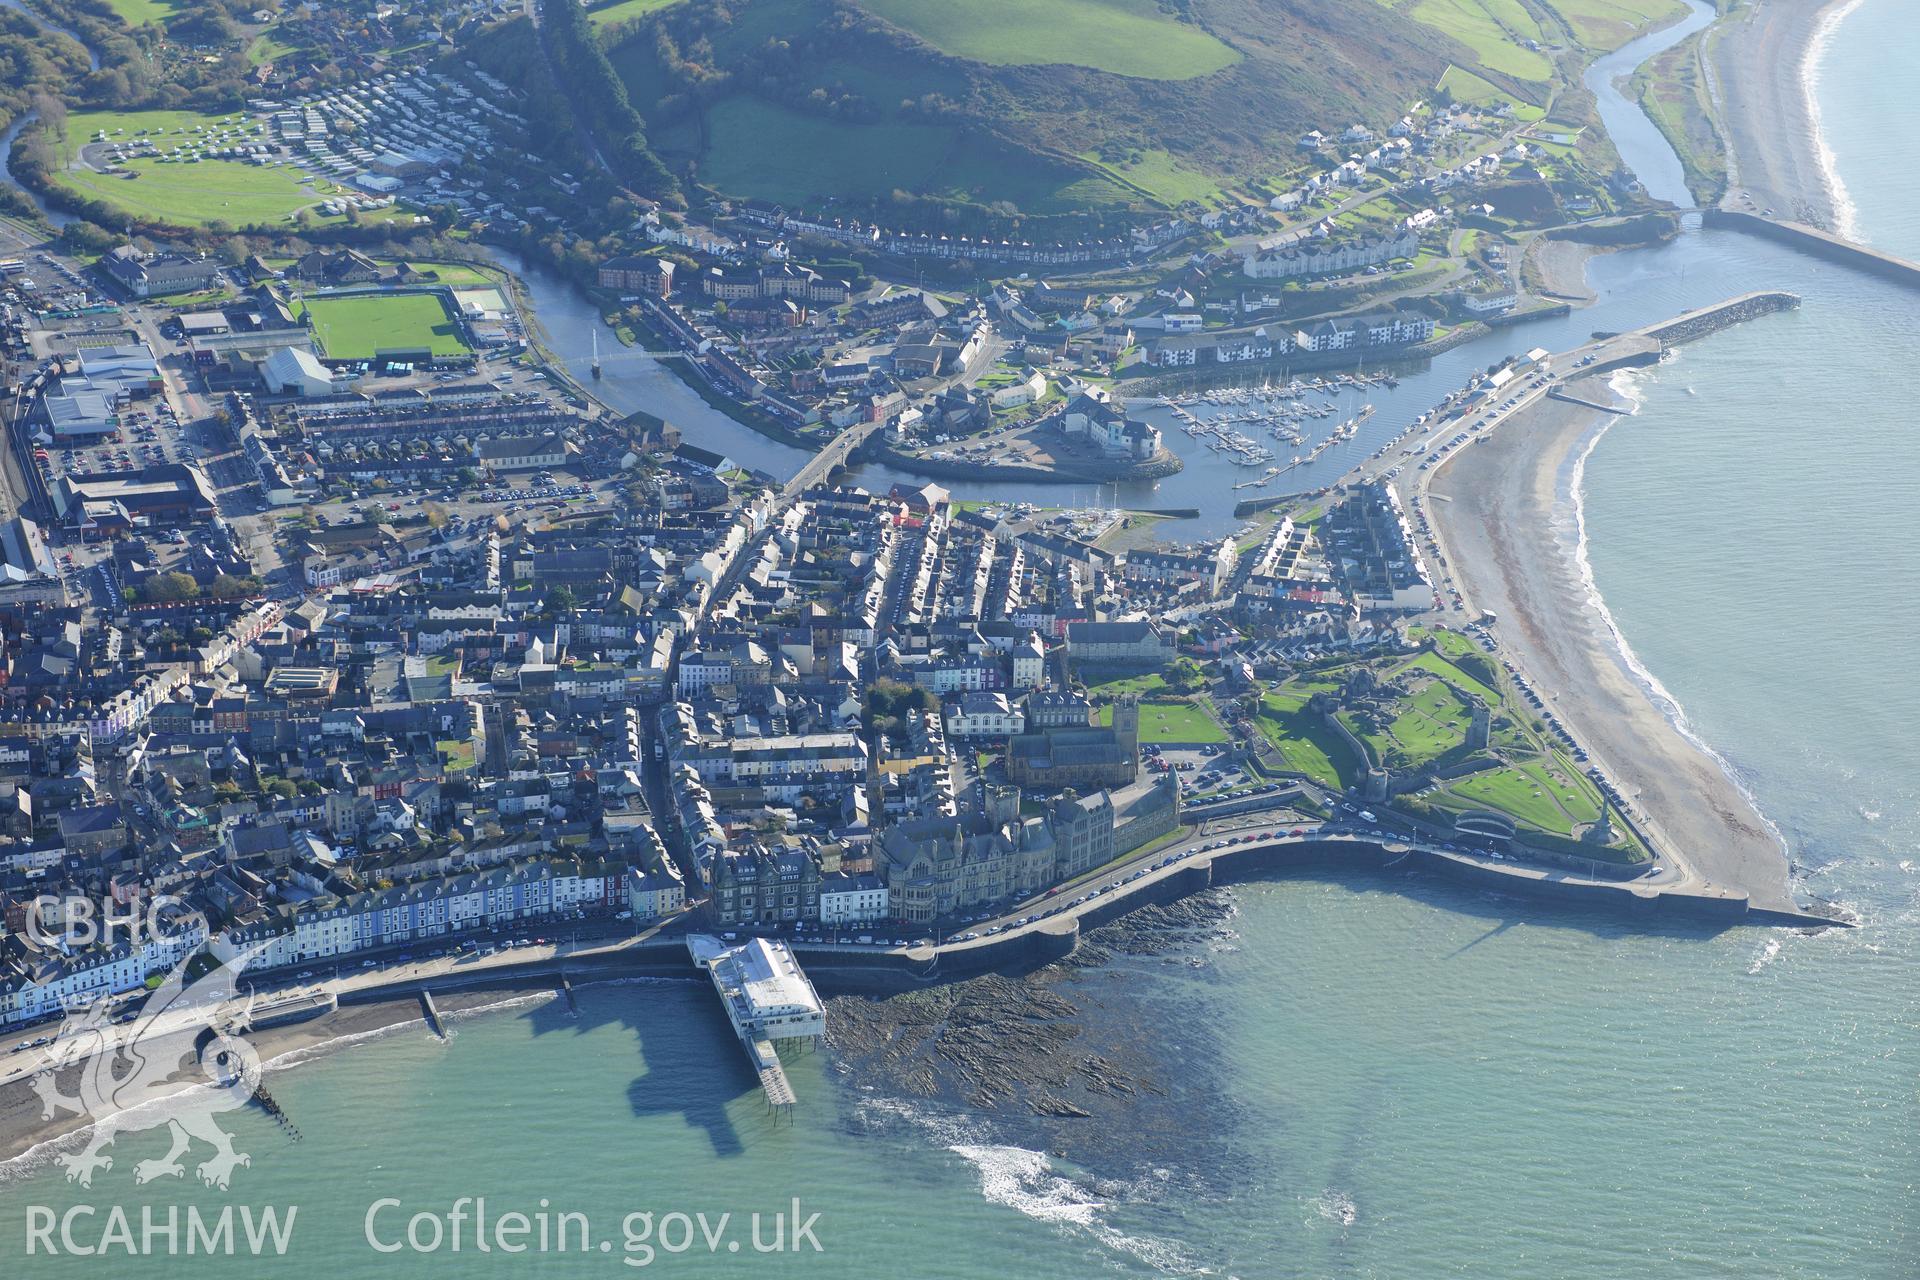 RCAHMW colour oblique photograph of Aberystwyth, winter view. Taken by Toby Driver on 05/11/2012.